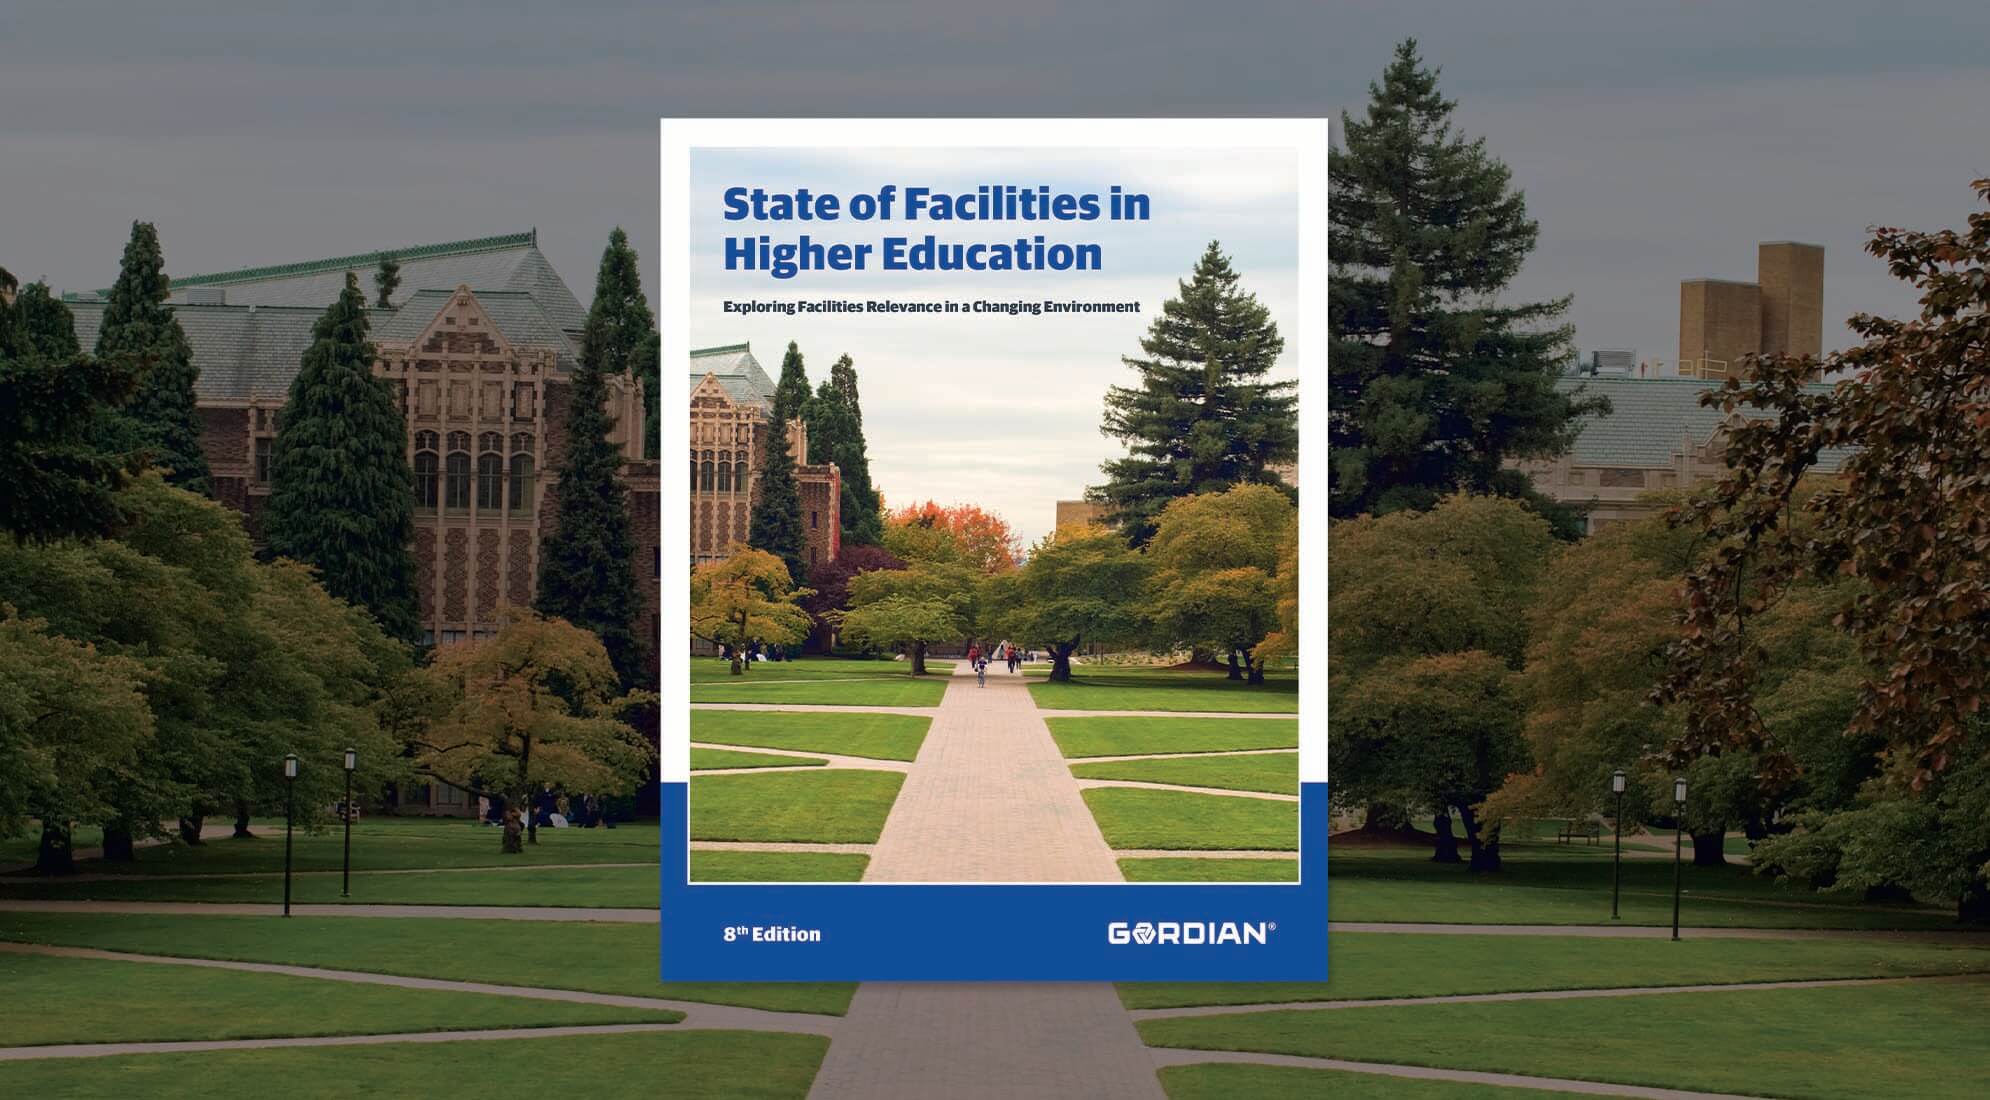 State of Facilities in Higher Education, 8th Edition